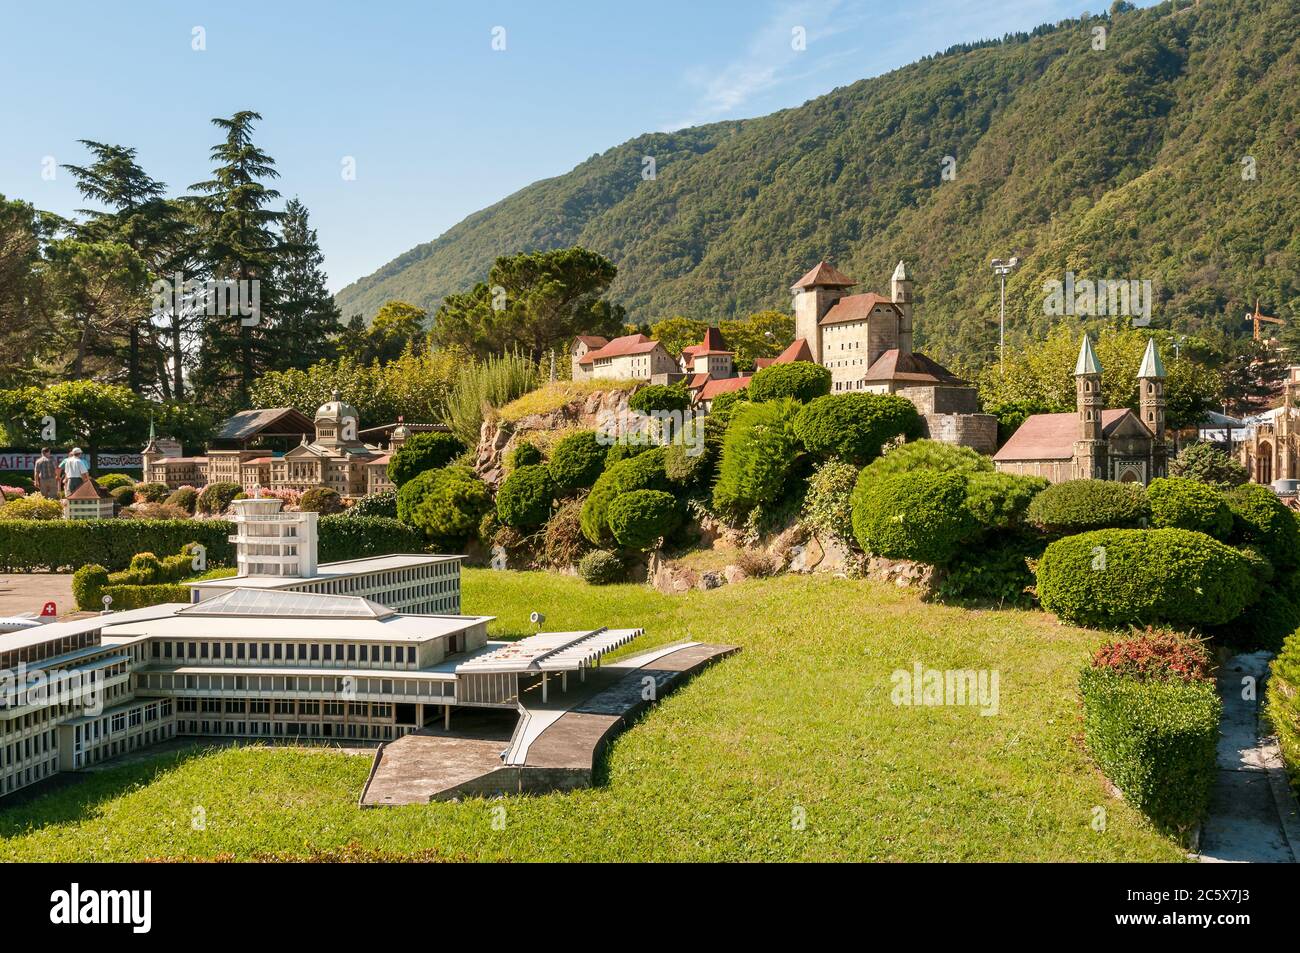 Melide, Ticino, Switzerland - September 25, 2014: Swissminiatur, is a Swiss miniature park, located in Melide, on the shores of Lake Lugano. Stock Photo